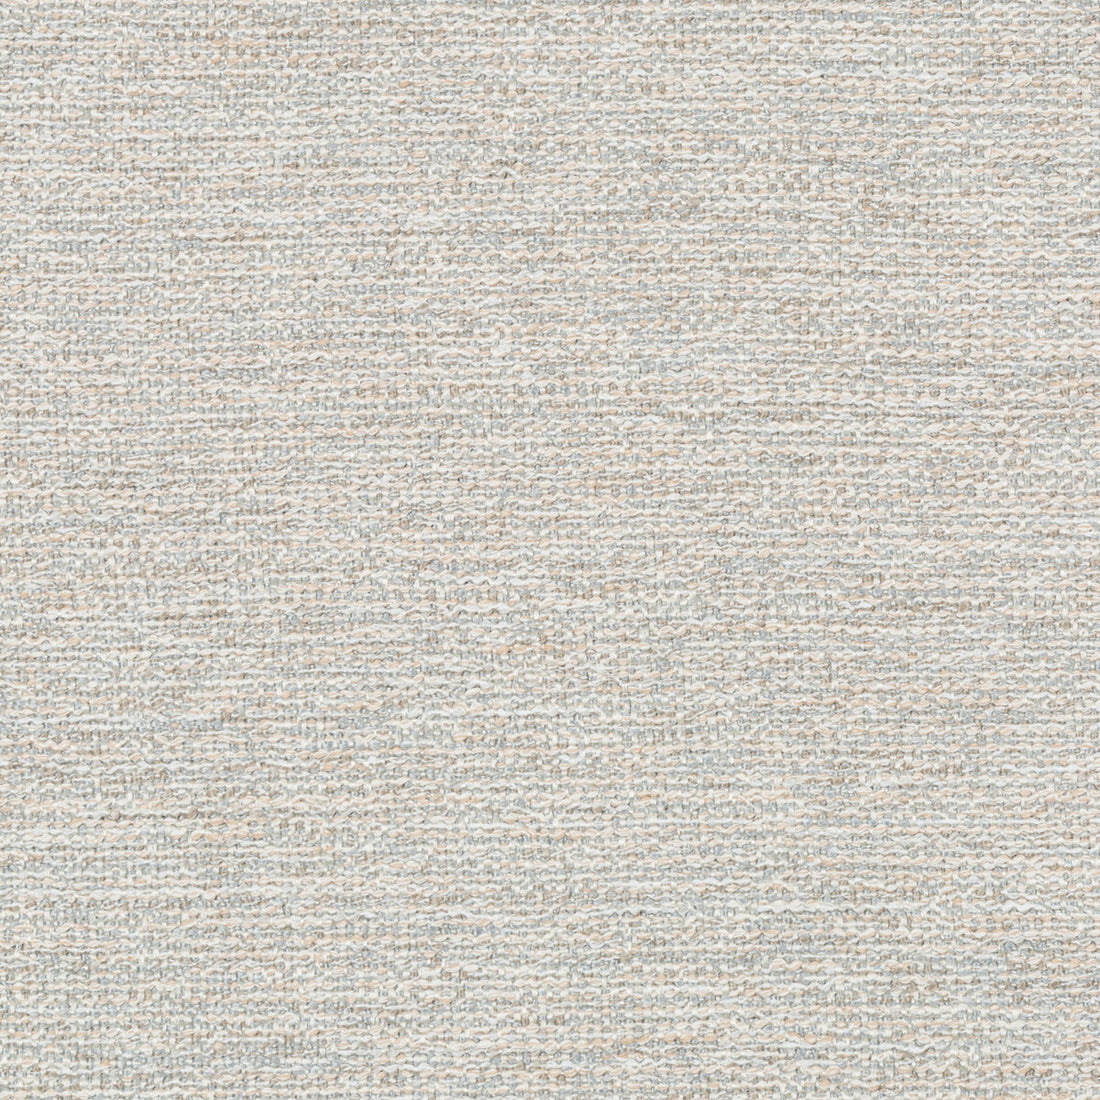 Kravet Couture fabric in 36603-11 color - pattern 36603.11.0 - by Kravet Couture in the Mabley Handler collection